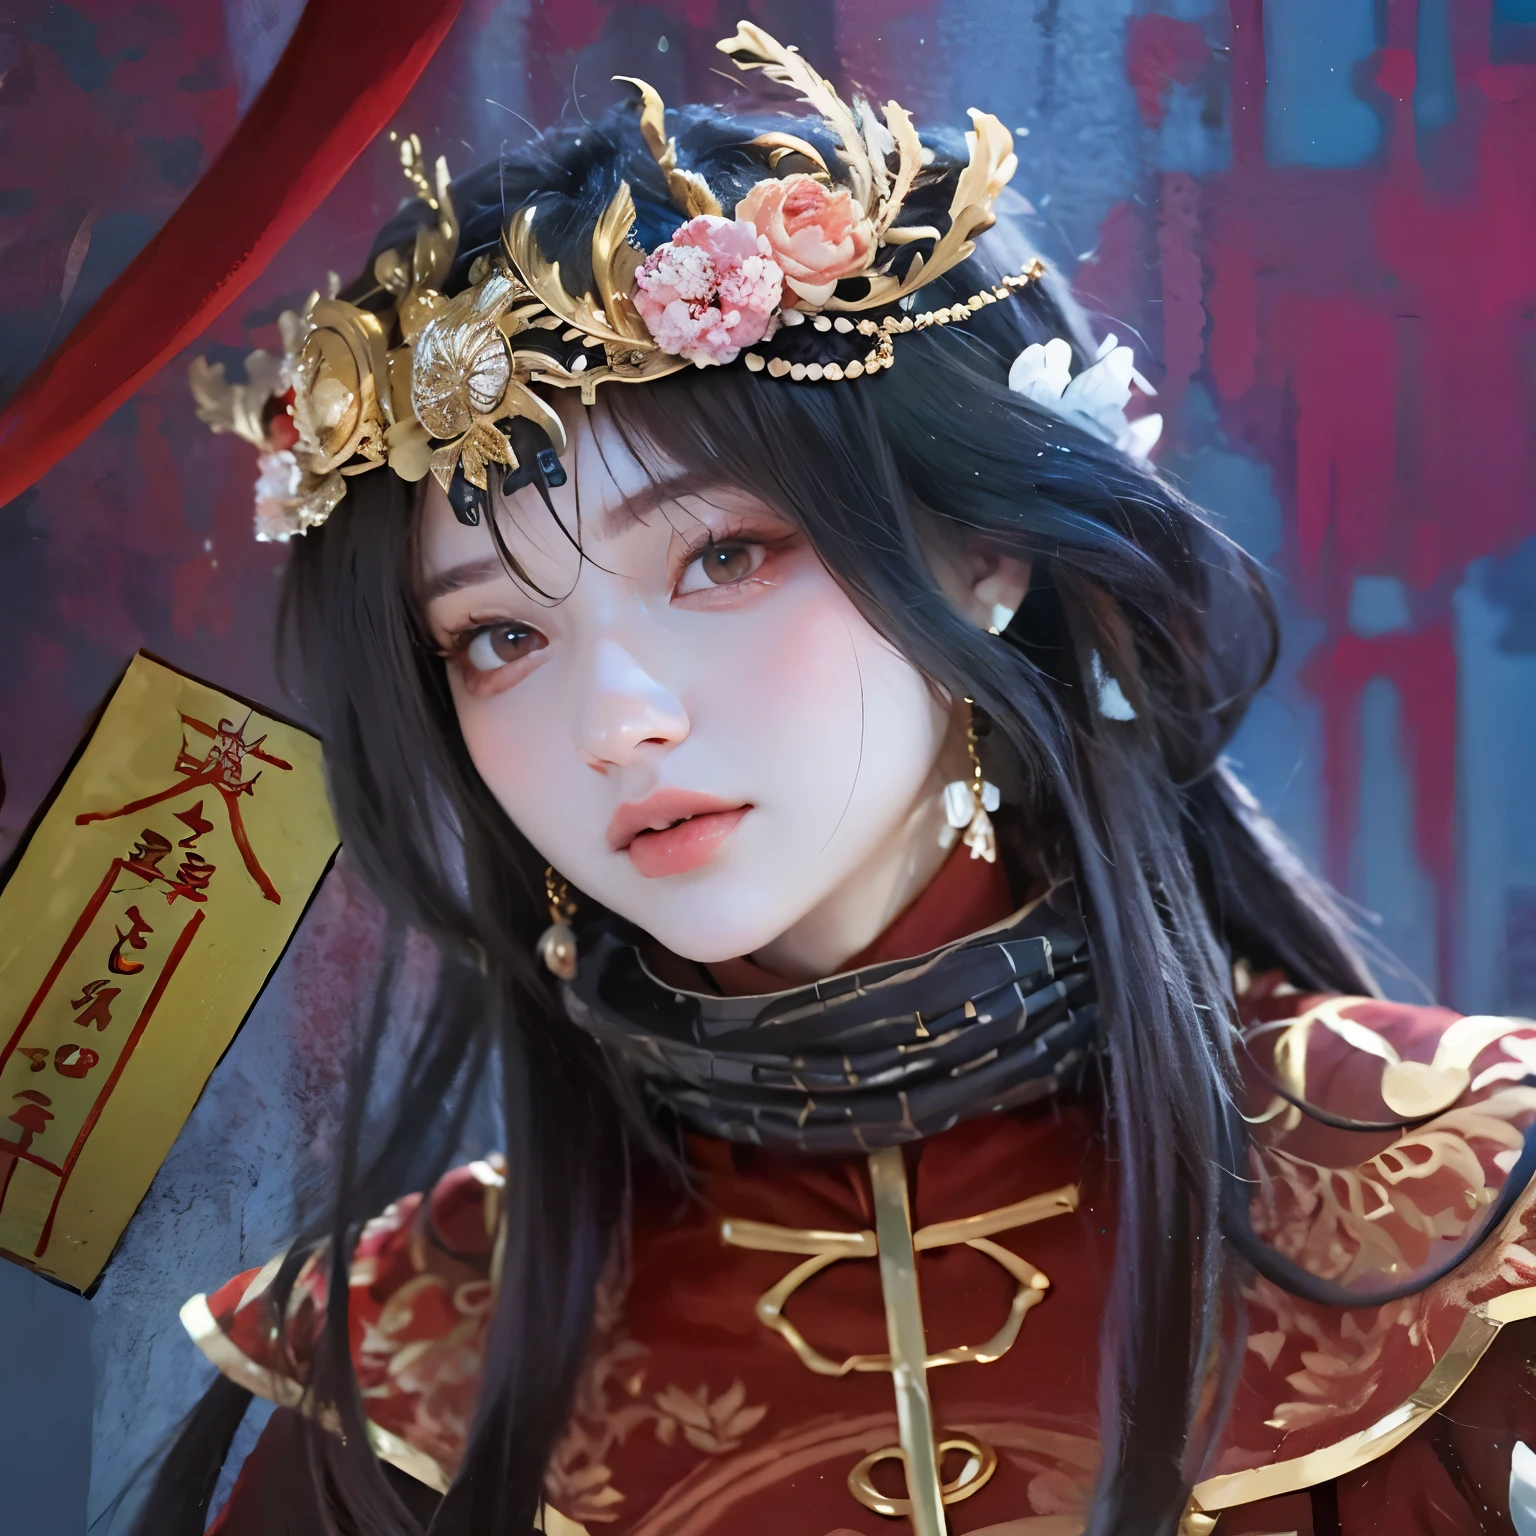 a close up of a woman wearing a crown and a red dress, palace ， a girl in hanfu, guweiz, inspired by Li Mei-shu, hanfu, artwork in the style of guweiz, a beautiful fantasy empress, ((a beautiful fantasy empress)), trending on cgstation, by Yang J, inspired by Wang Meng, inspired by Lan Ying